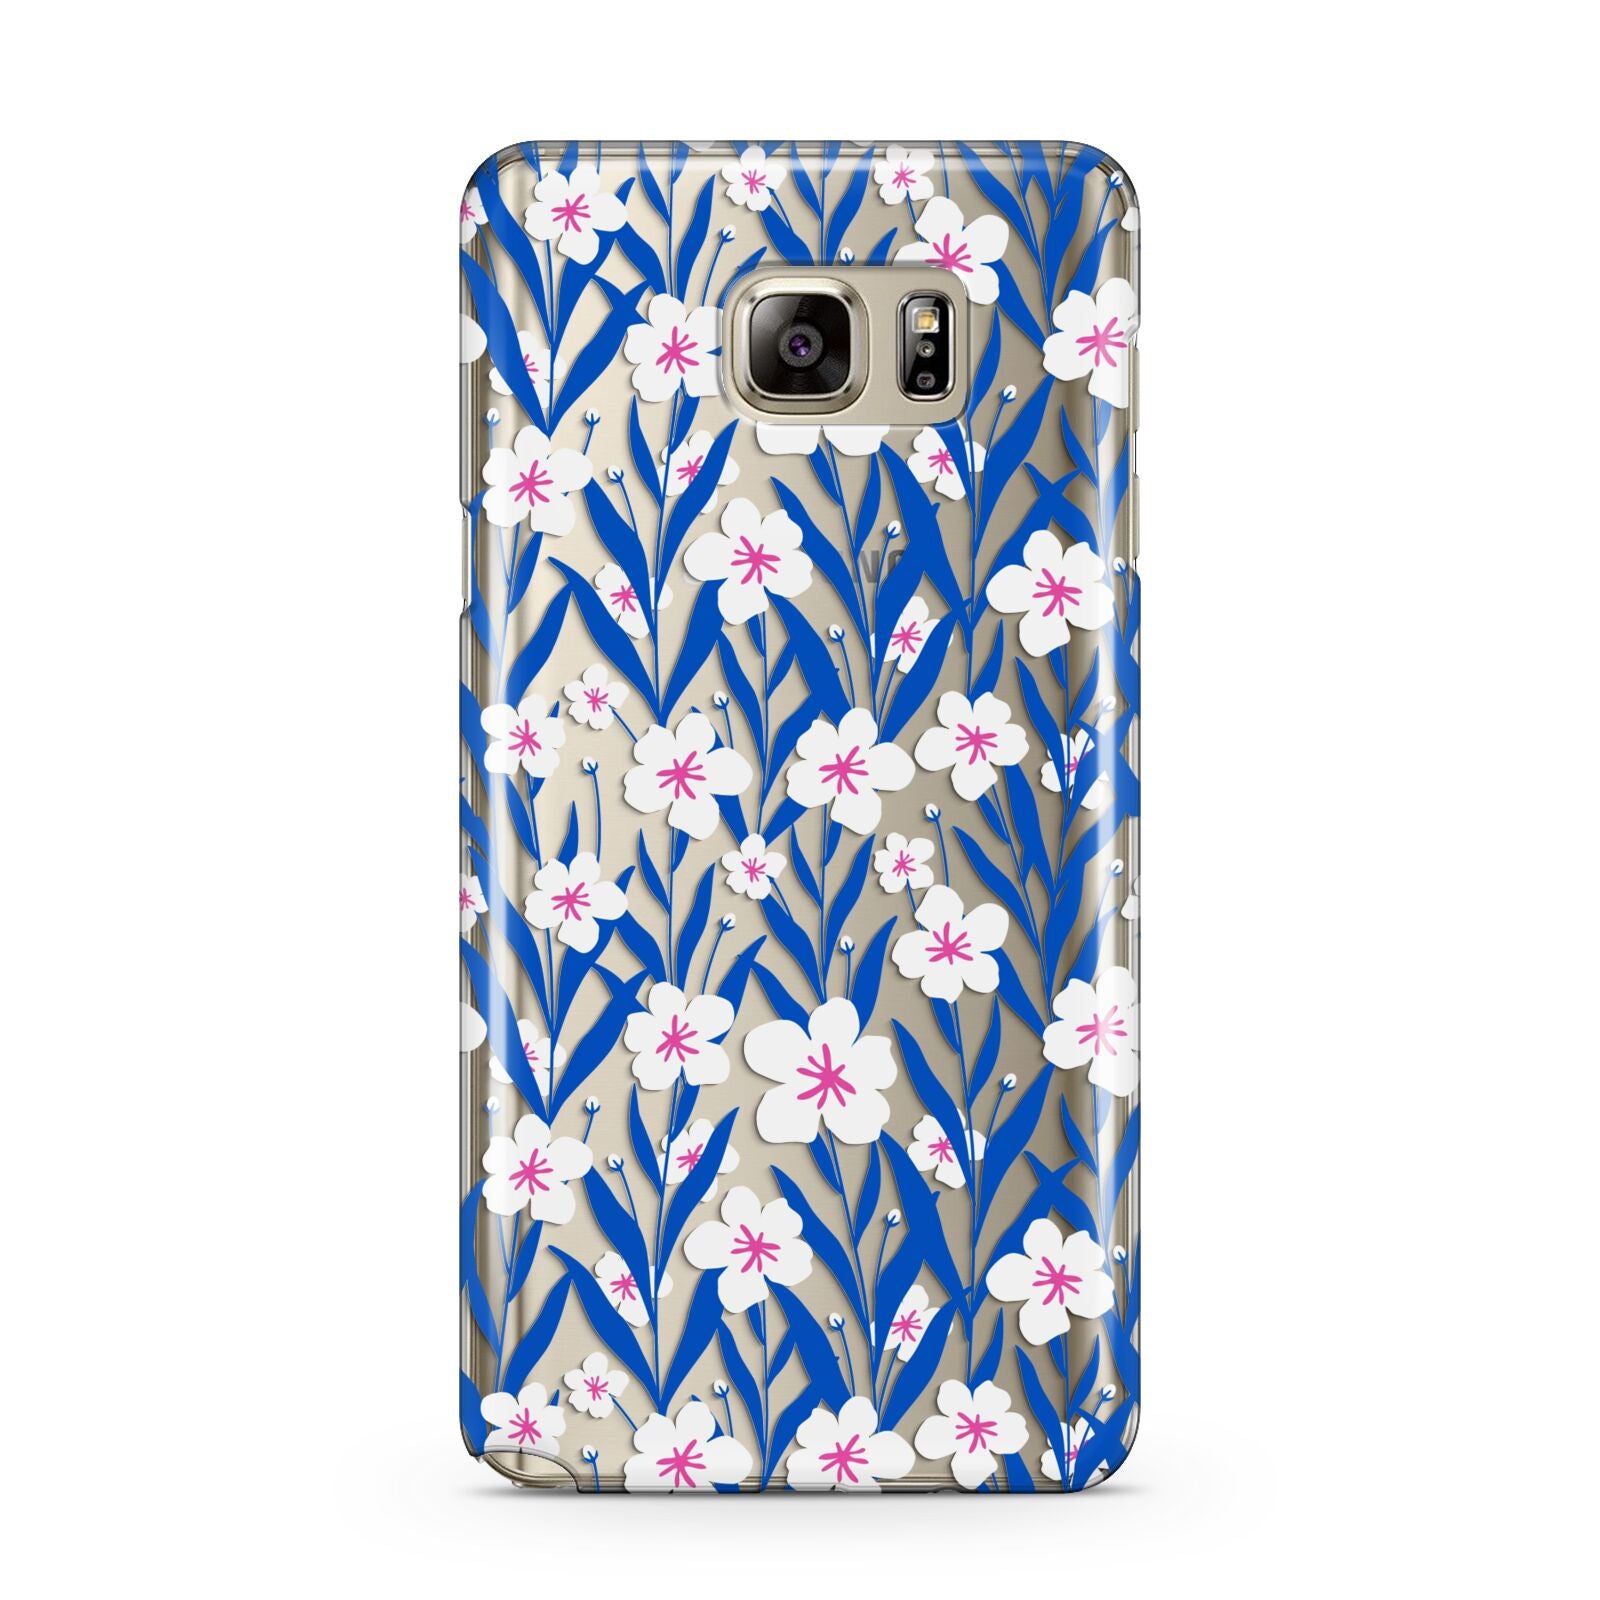 Blue and White Flowers Samsung Galaxy Note 5 Case